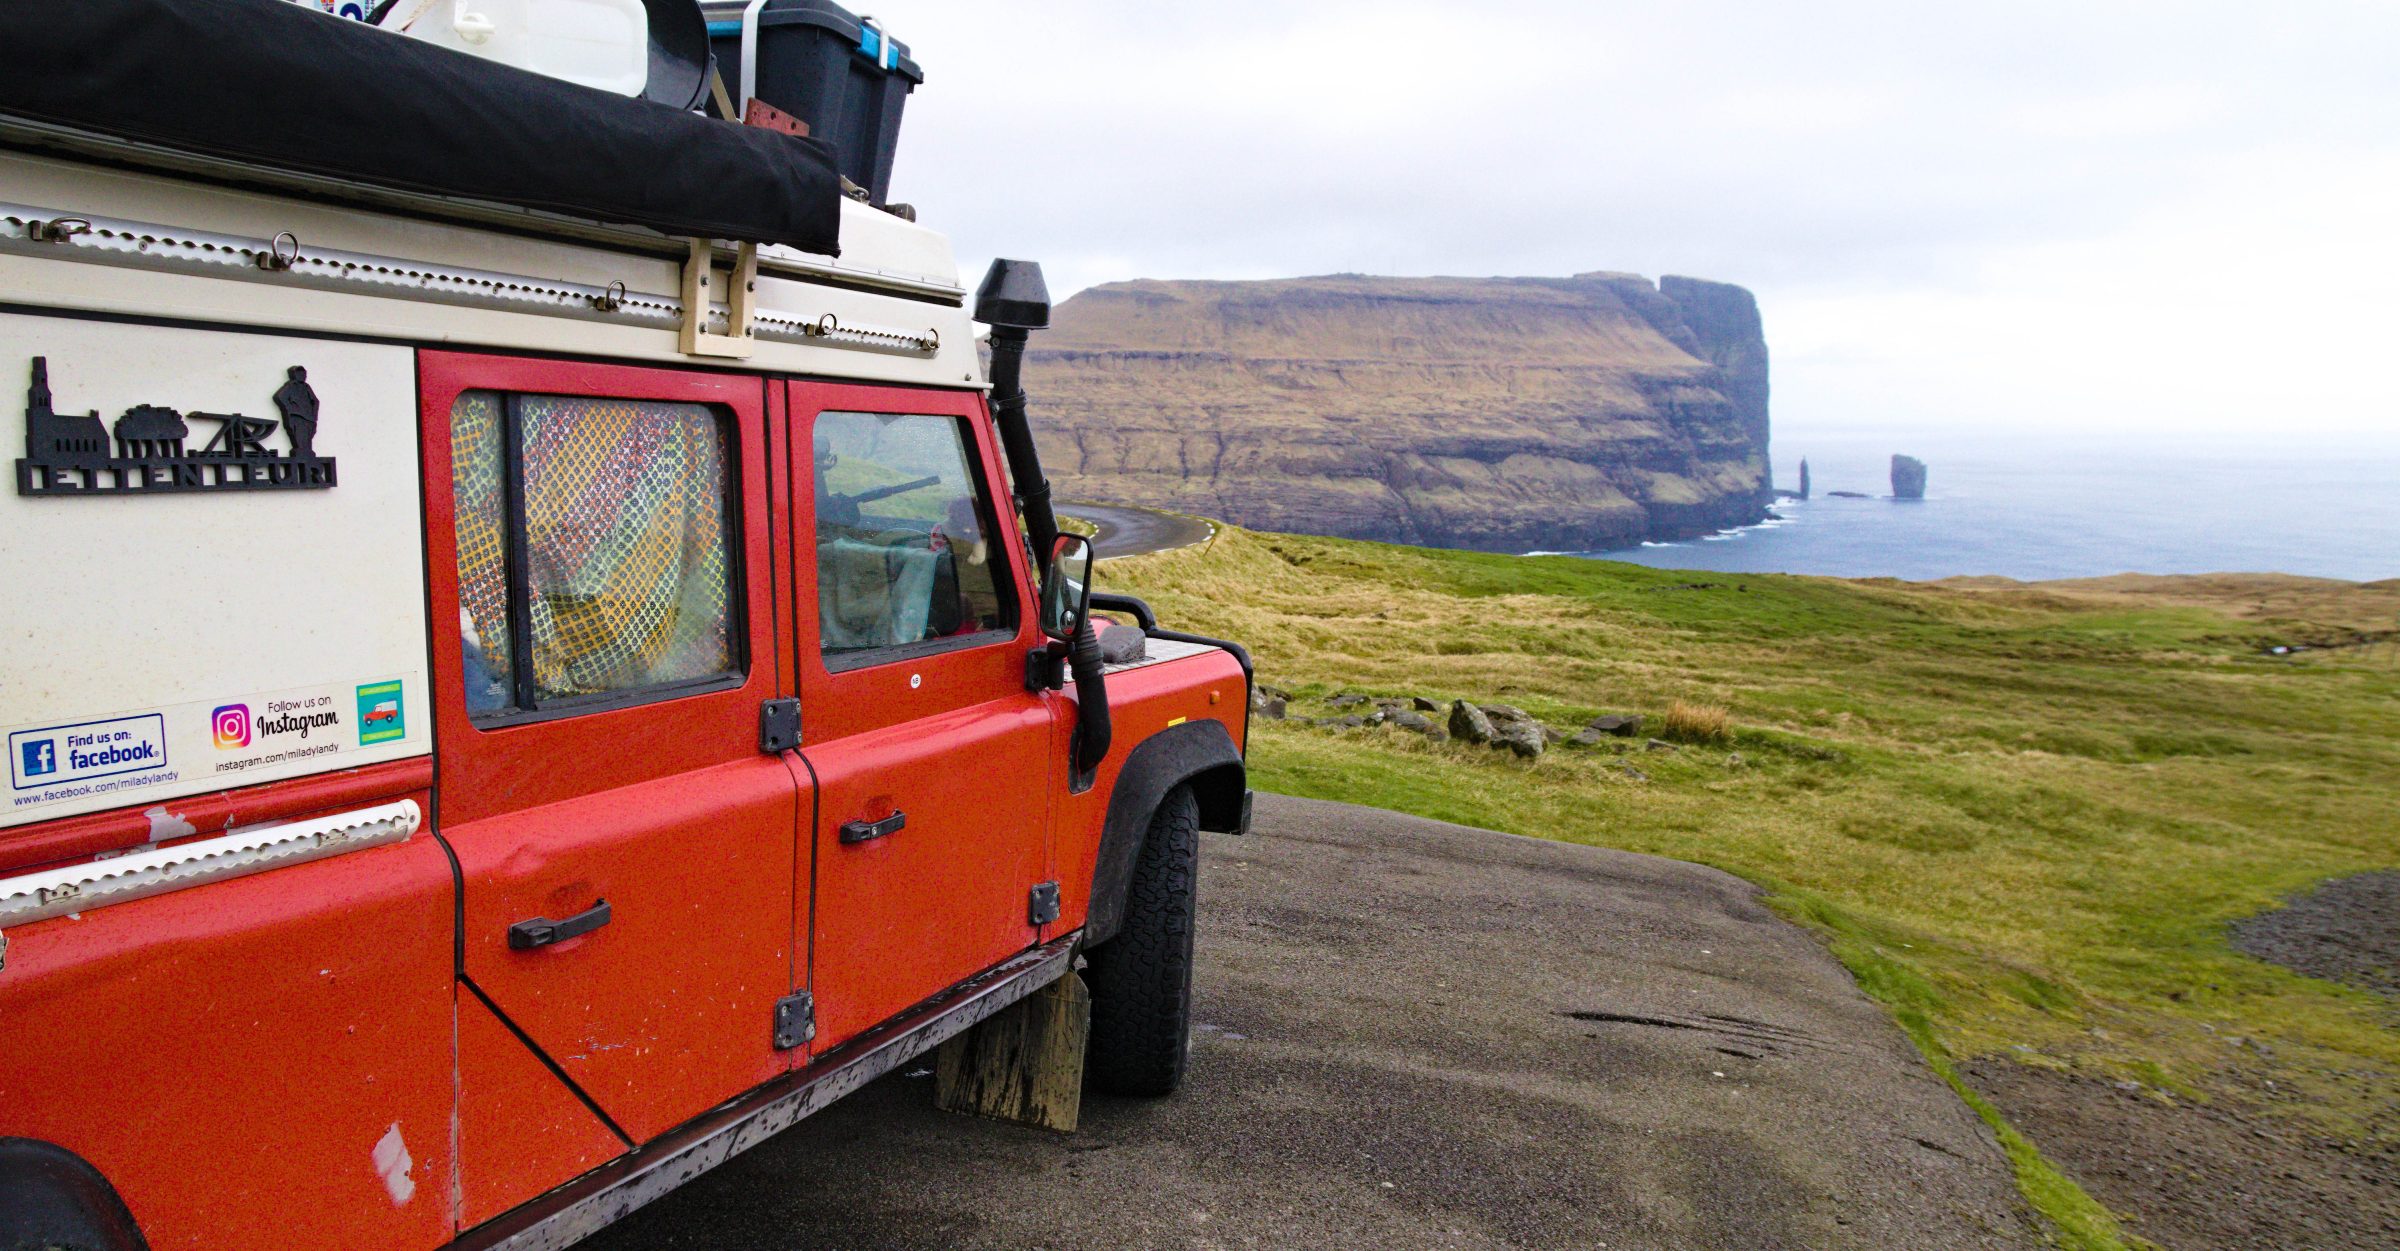 The Milady Landy Landrover in the Faroe Islands